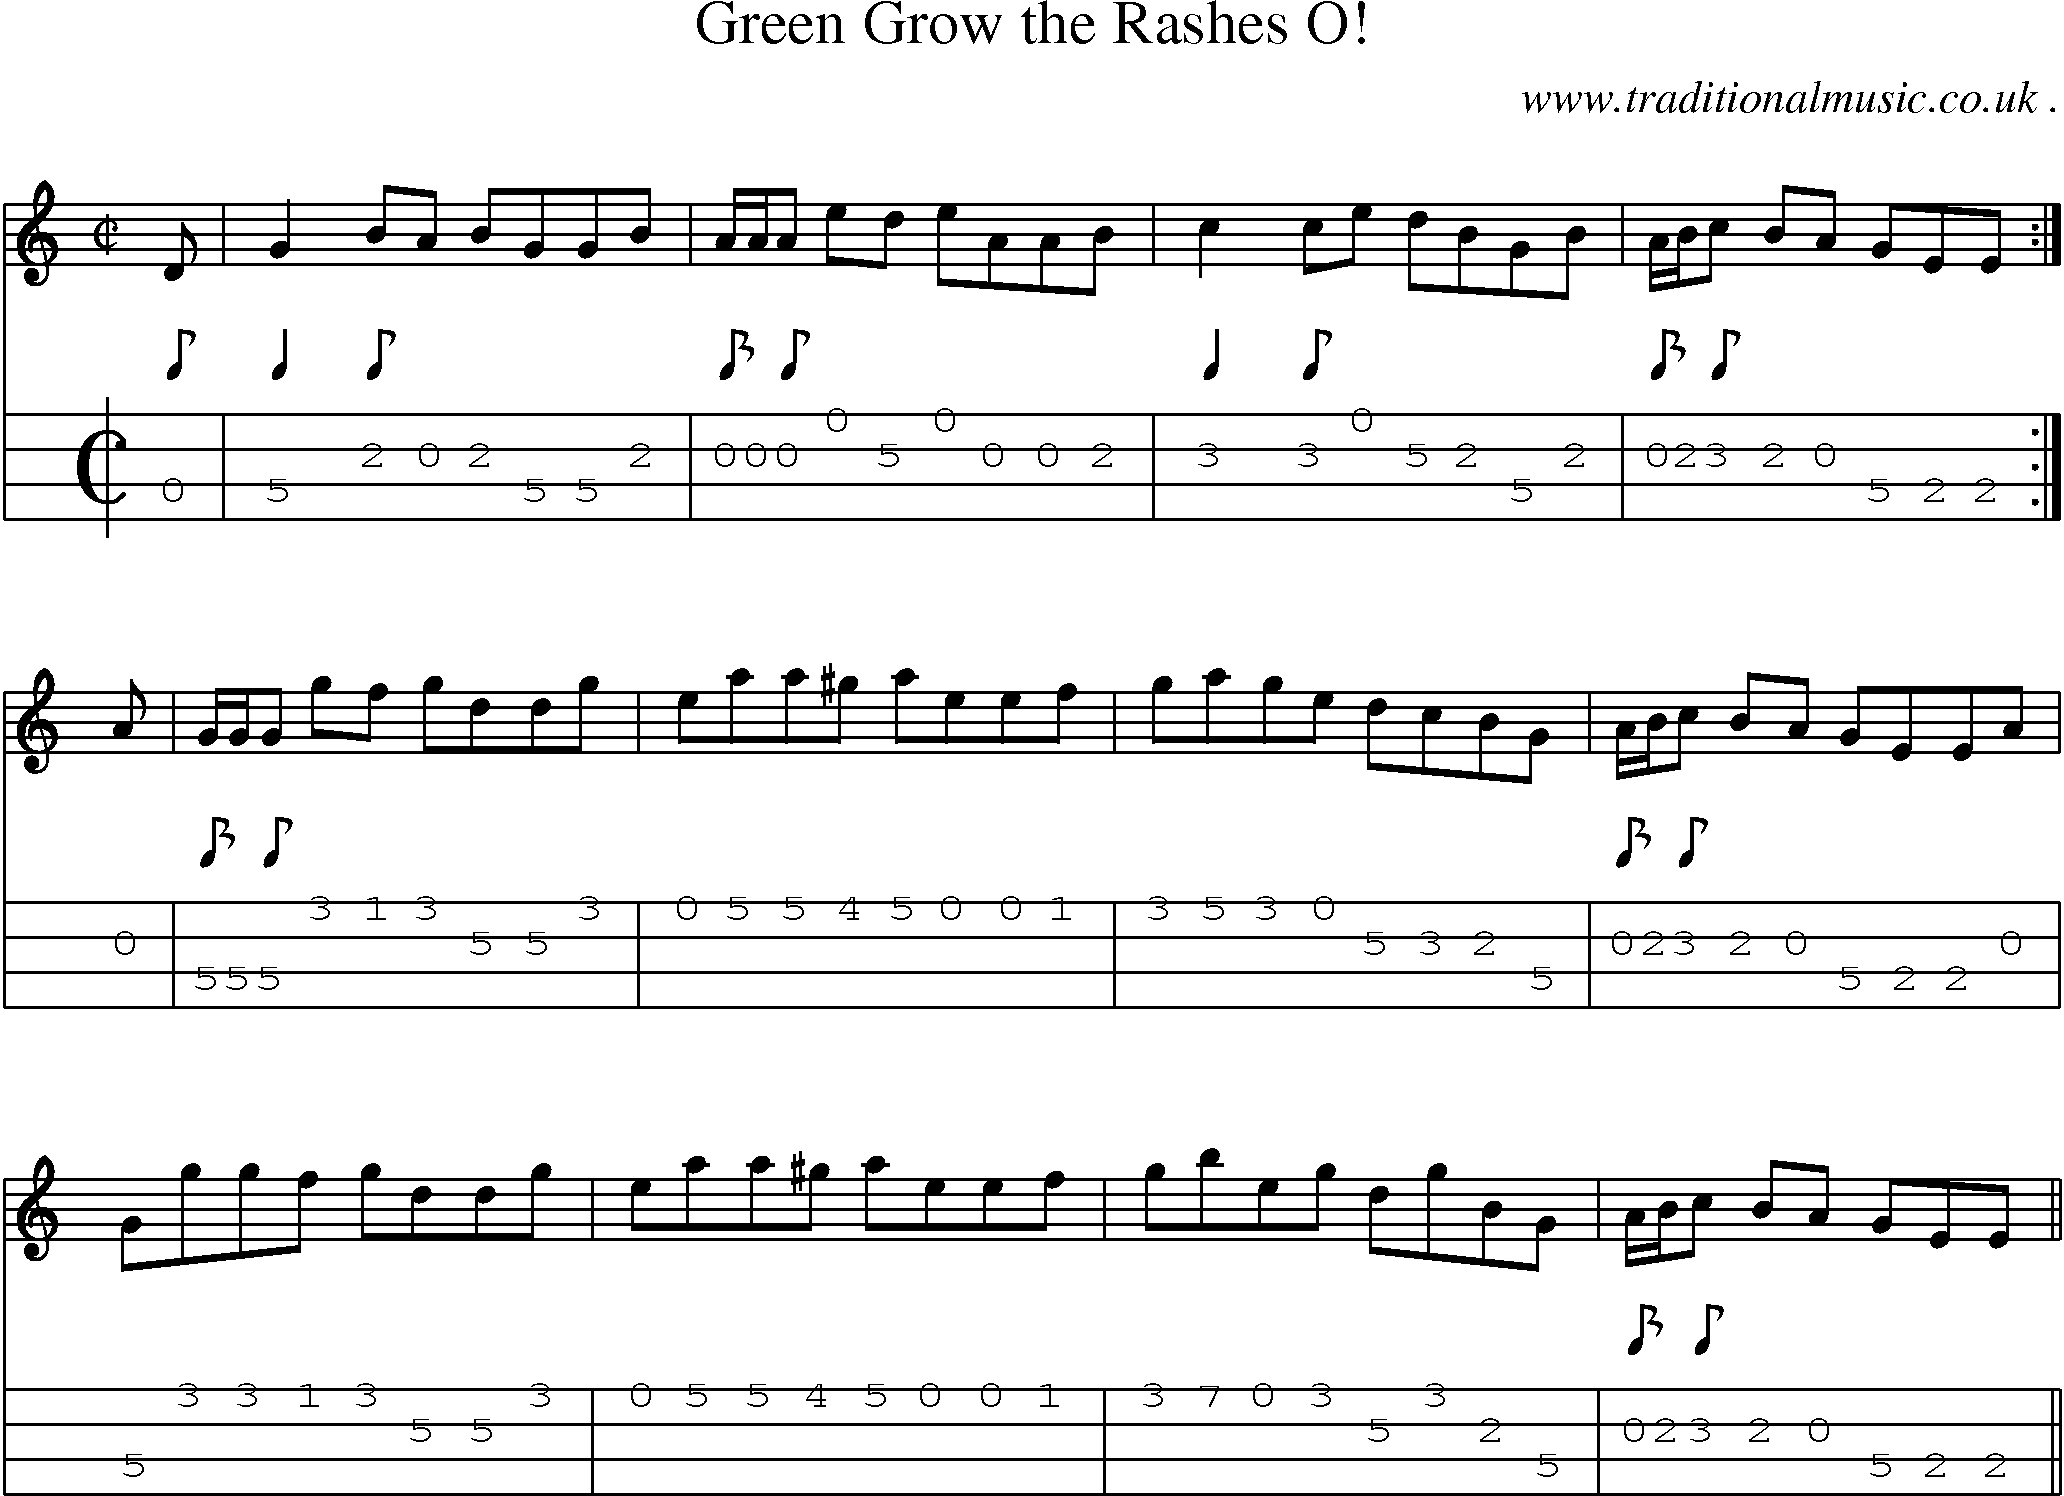 Sheet-music  score, Chords and Mandolin Tabs for Green Grow The Rashes O!